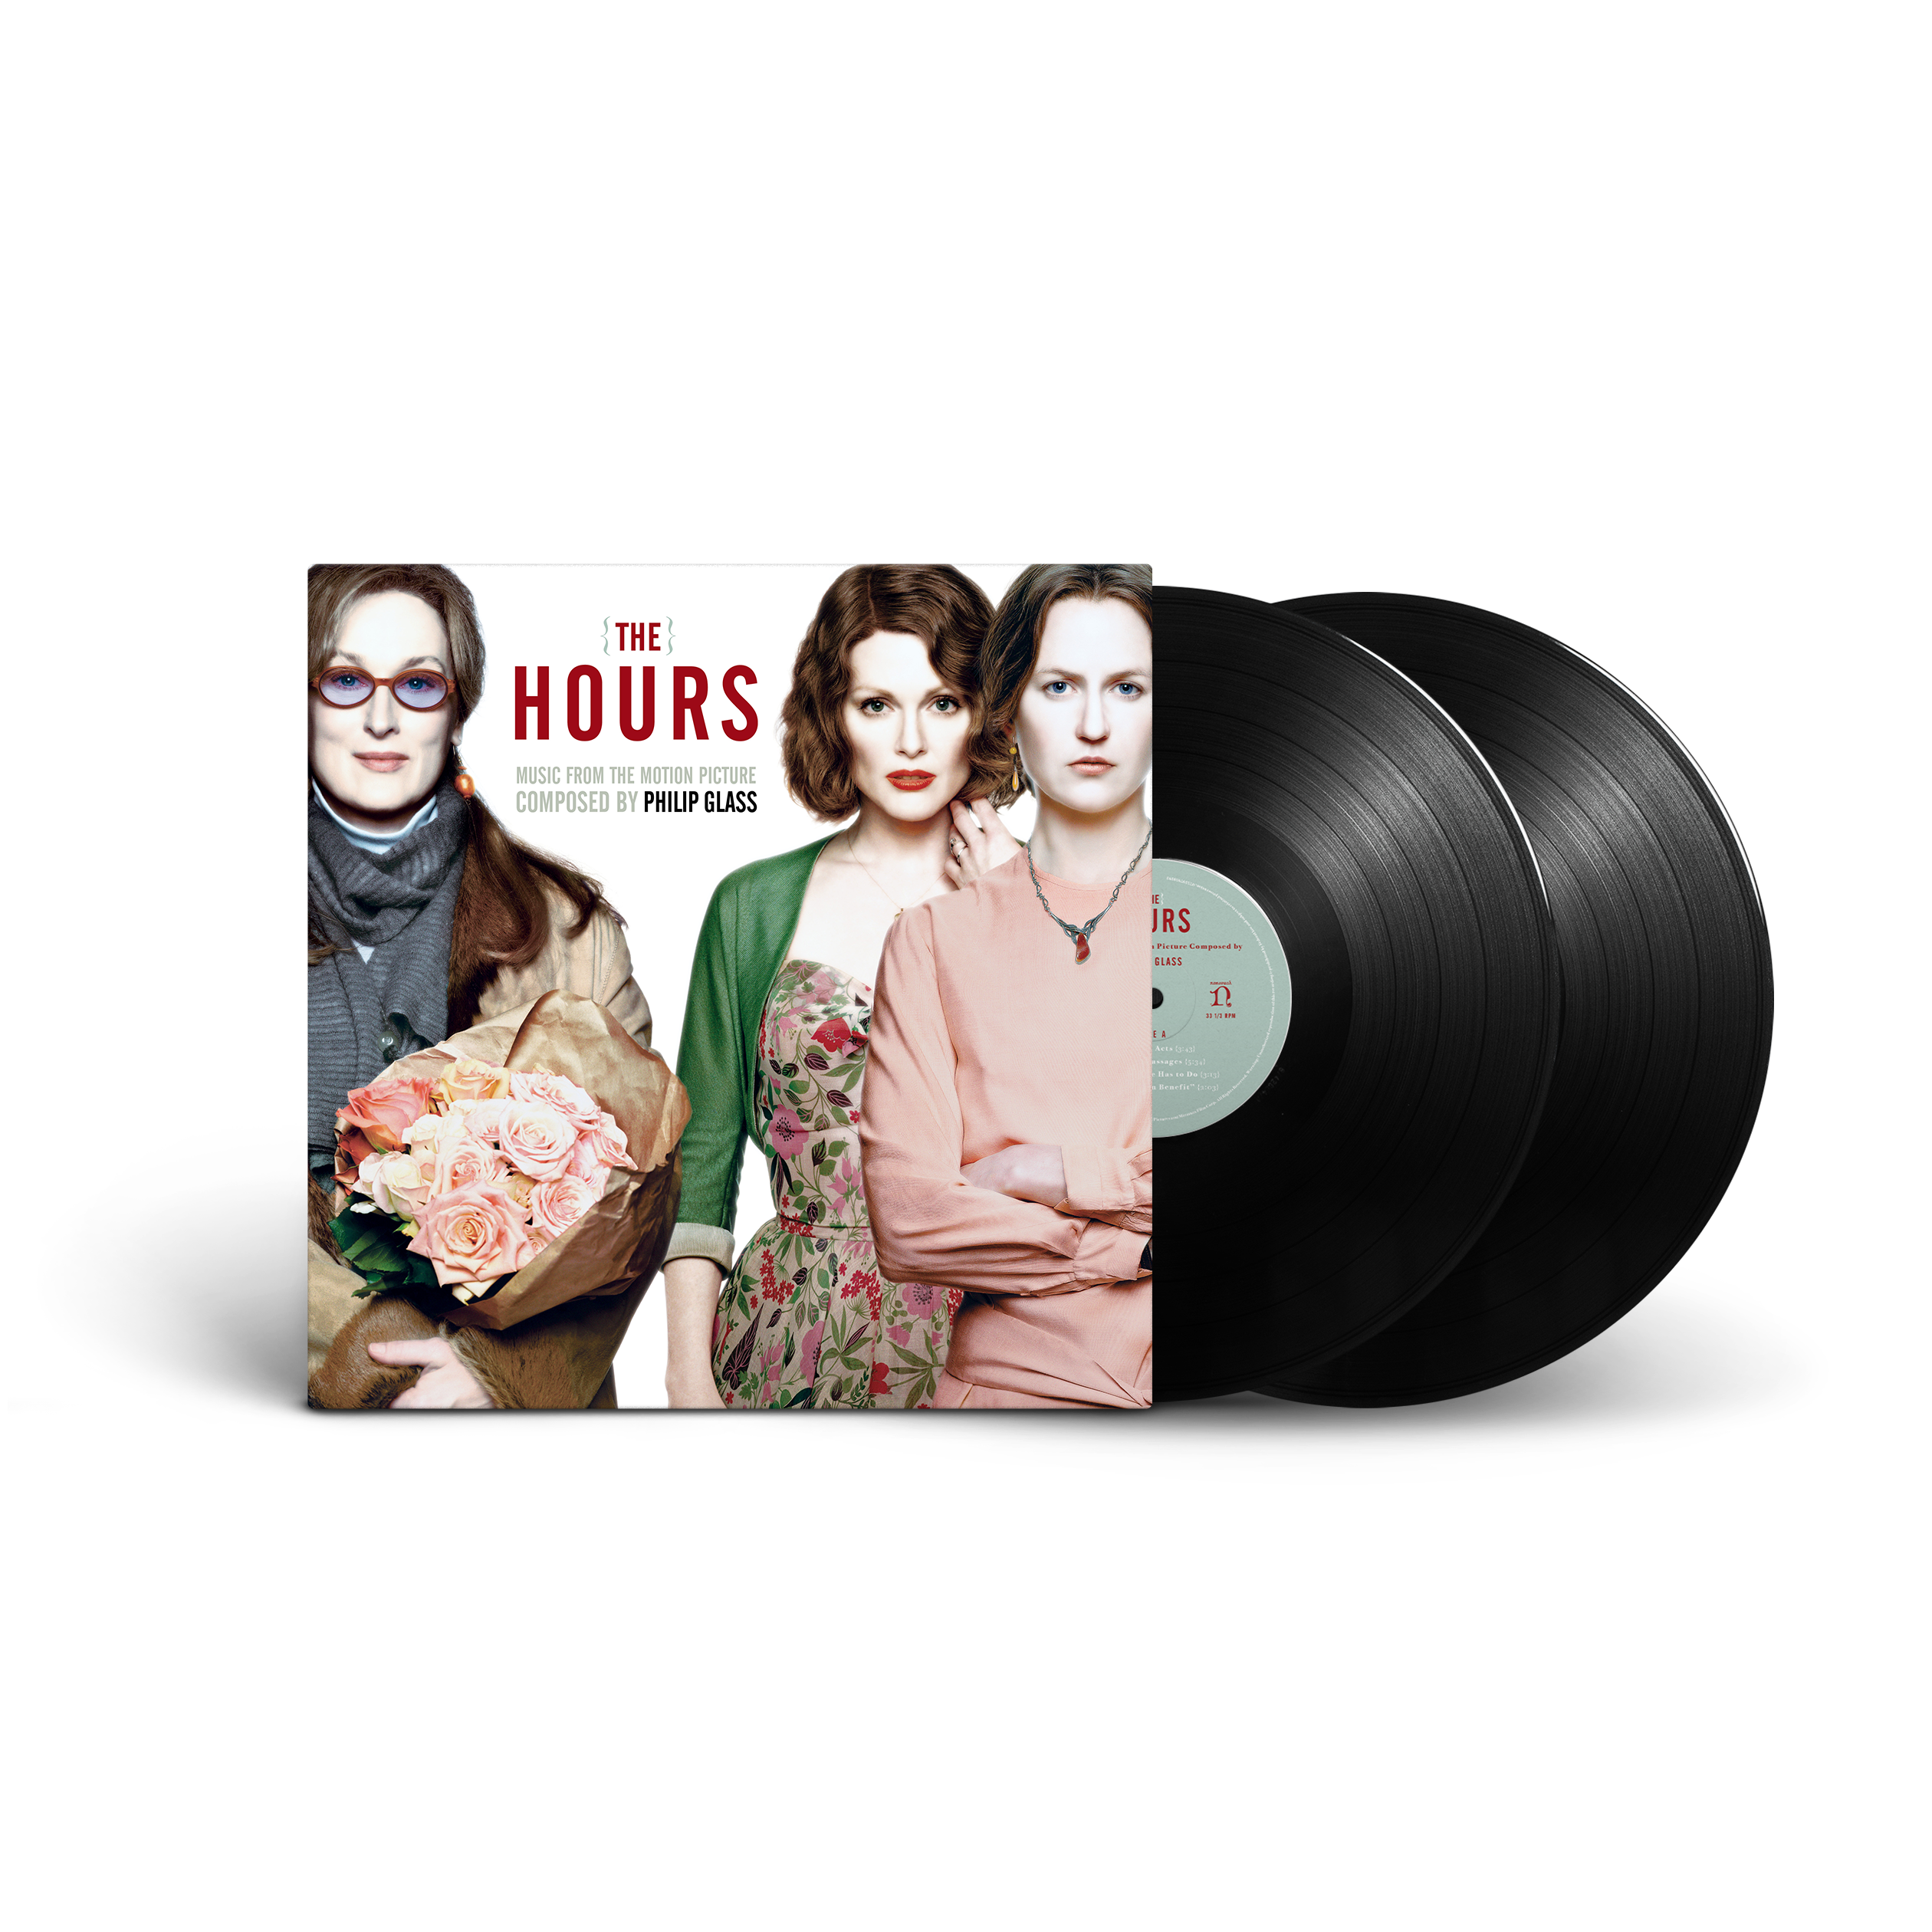 The Hours (Music from the Motion Picture Soundtrack): Vinyl 2LP